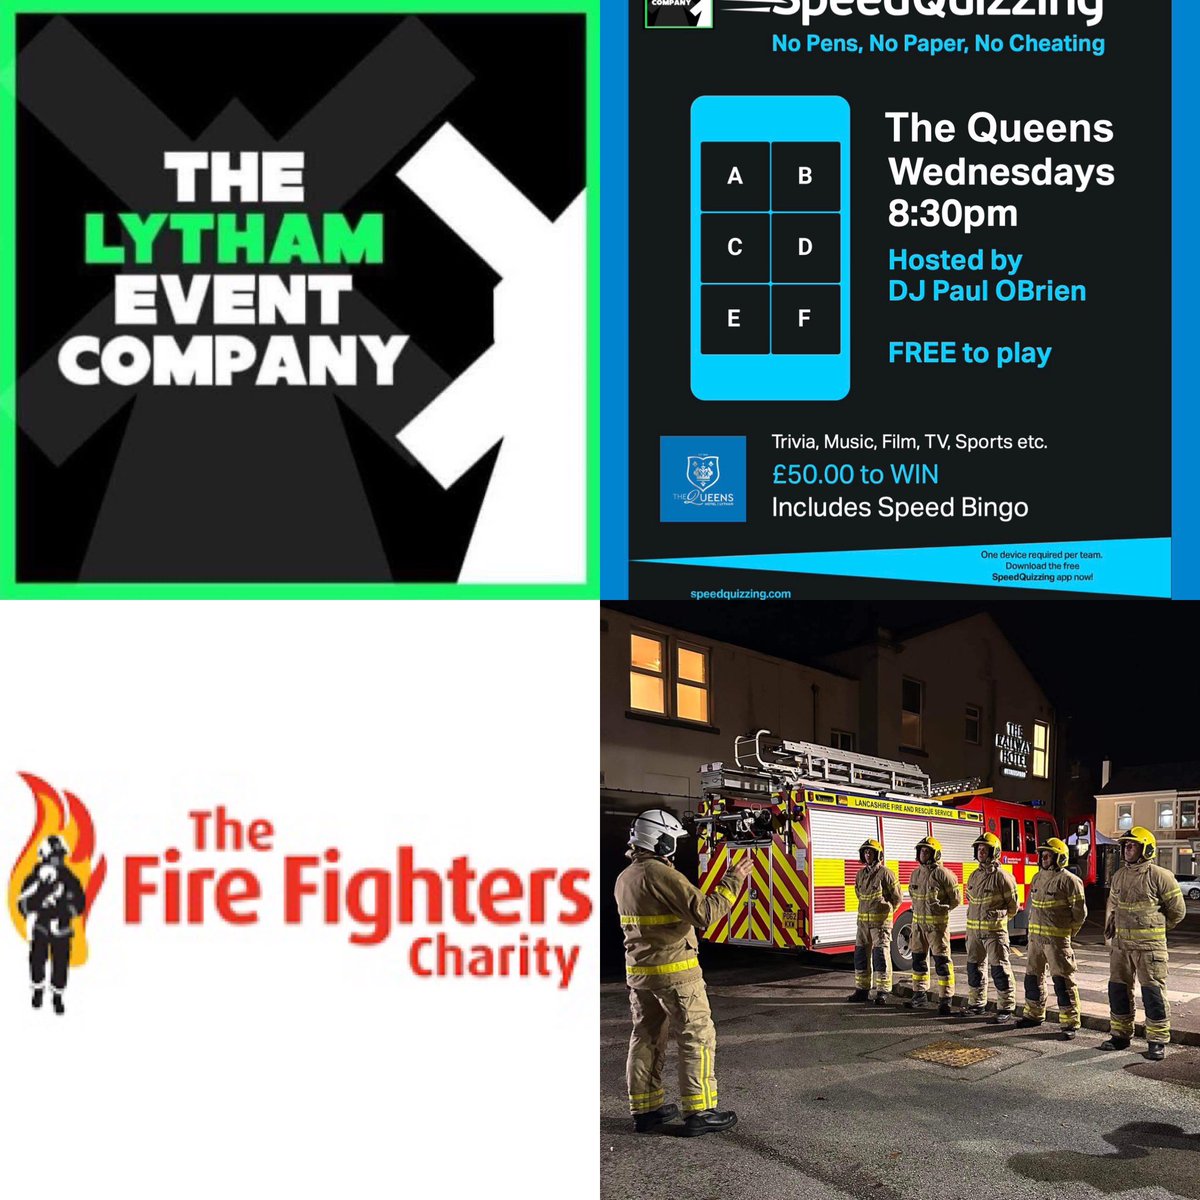 @SpeedQuizzing tonight in @queens_lytham with @djpaulobrien from 8:30pm ✅ FREE to play 💰 WIN £50.00 👩‍🚒 Donations appreciated for @firefighters999 @LancashireFRS @LythamFire 📱 Phone quiz & SpeedBingo #Lytham #Quiz #fun